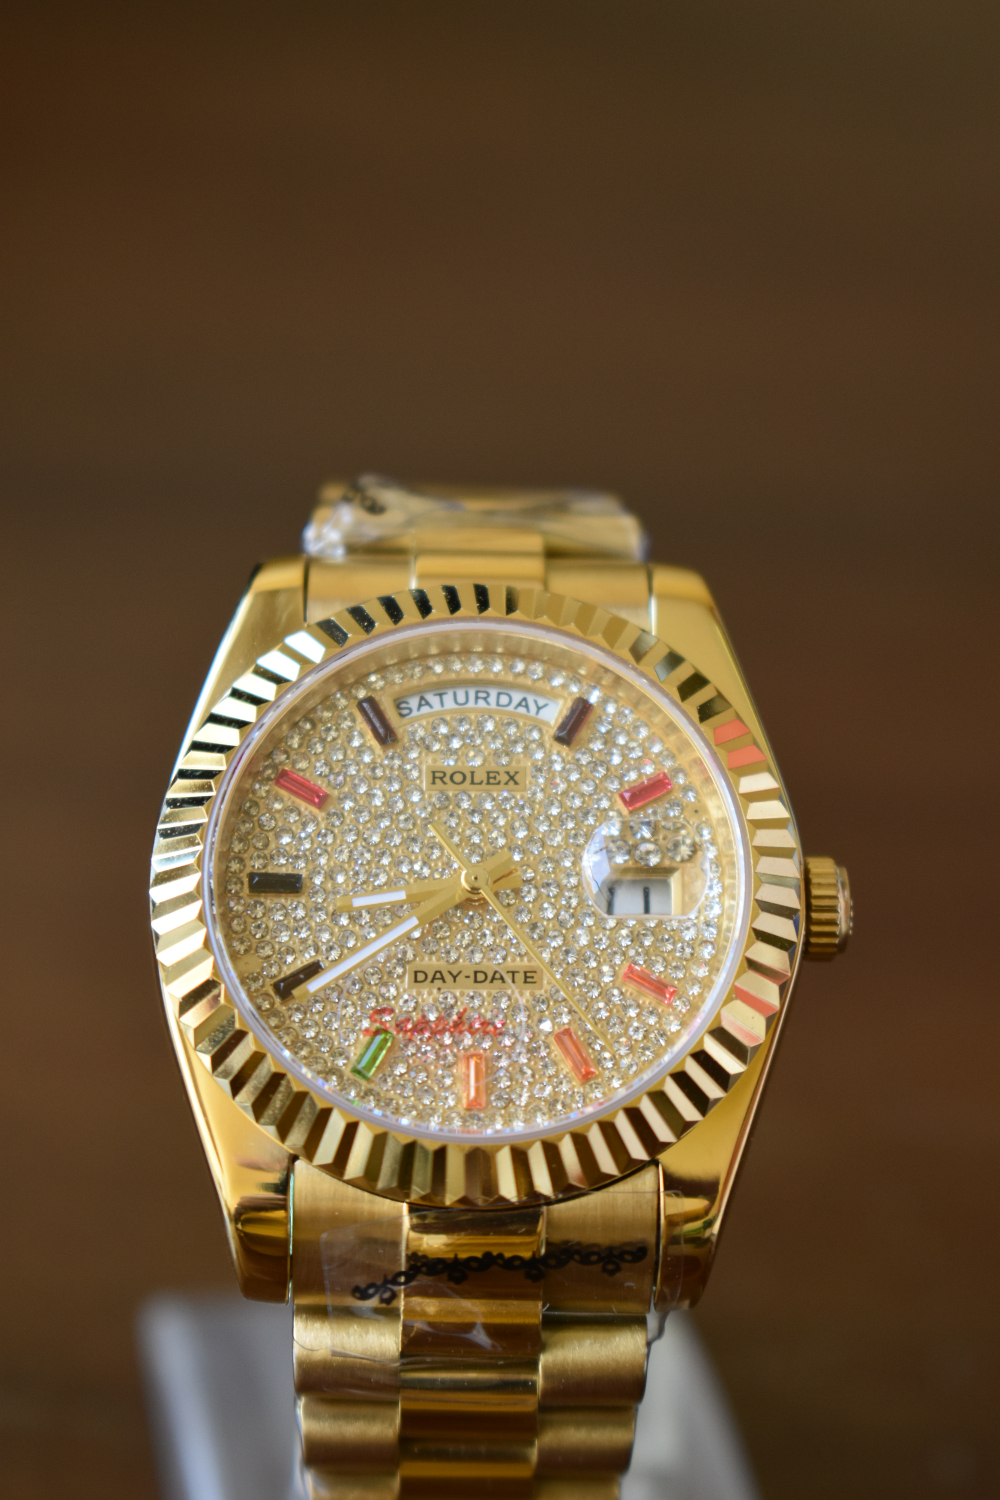 Rolex Day-Date 36 mm President Yellow Gold Diamond Paved Rainbow Colored Sapphires Dial 128238 for sale in Nairobi,Kenya.